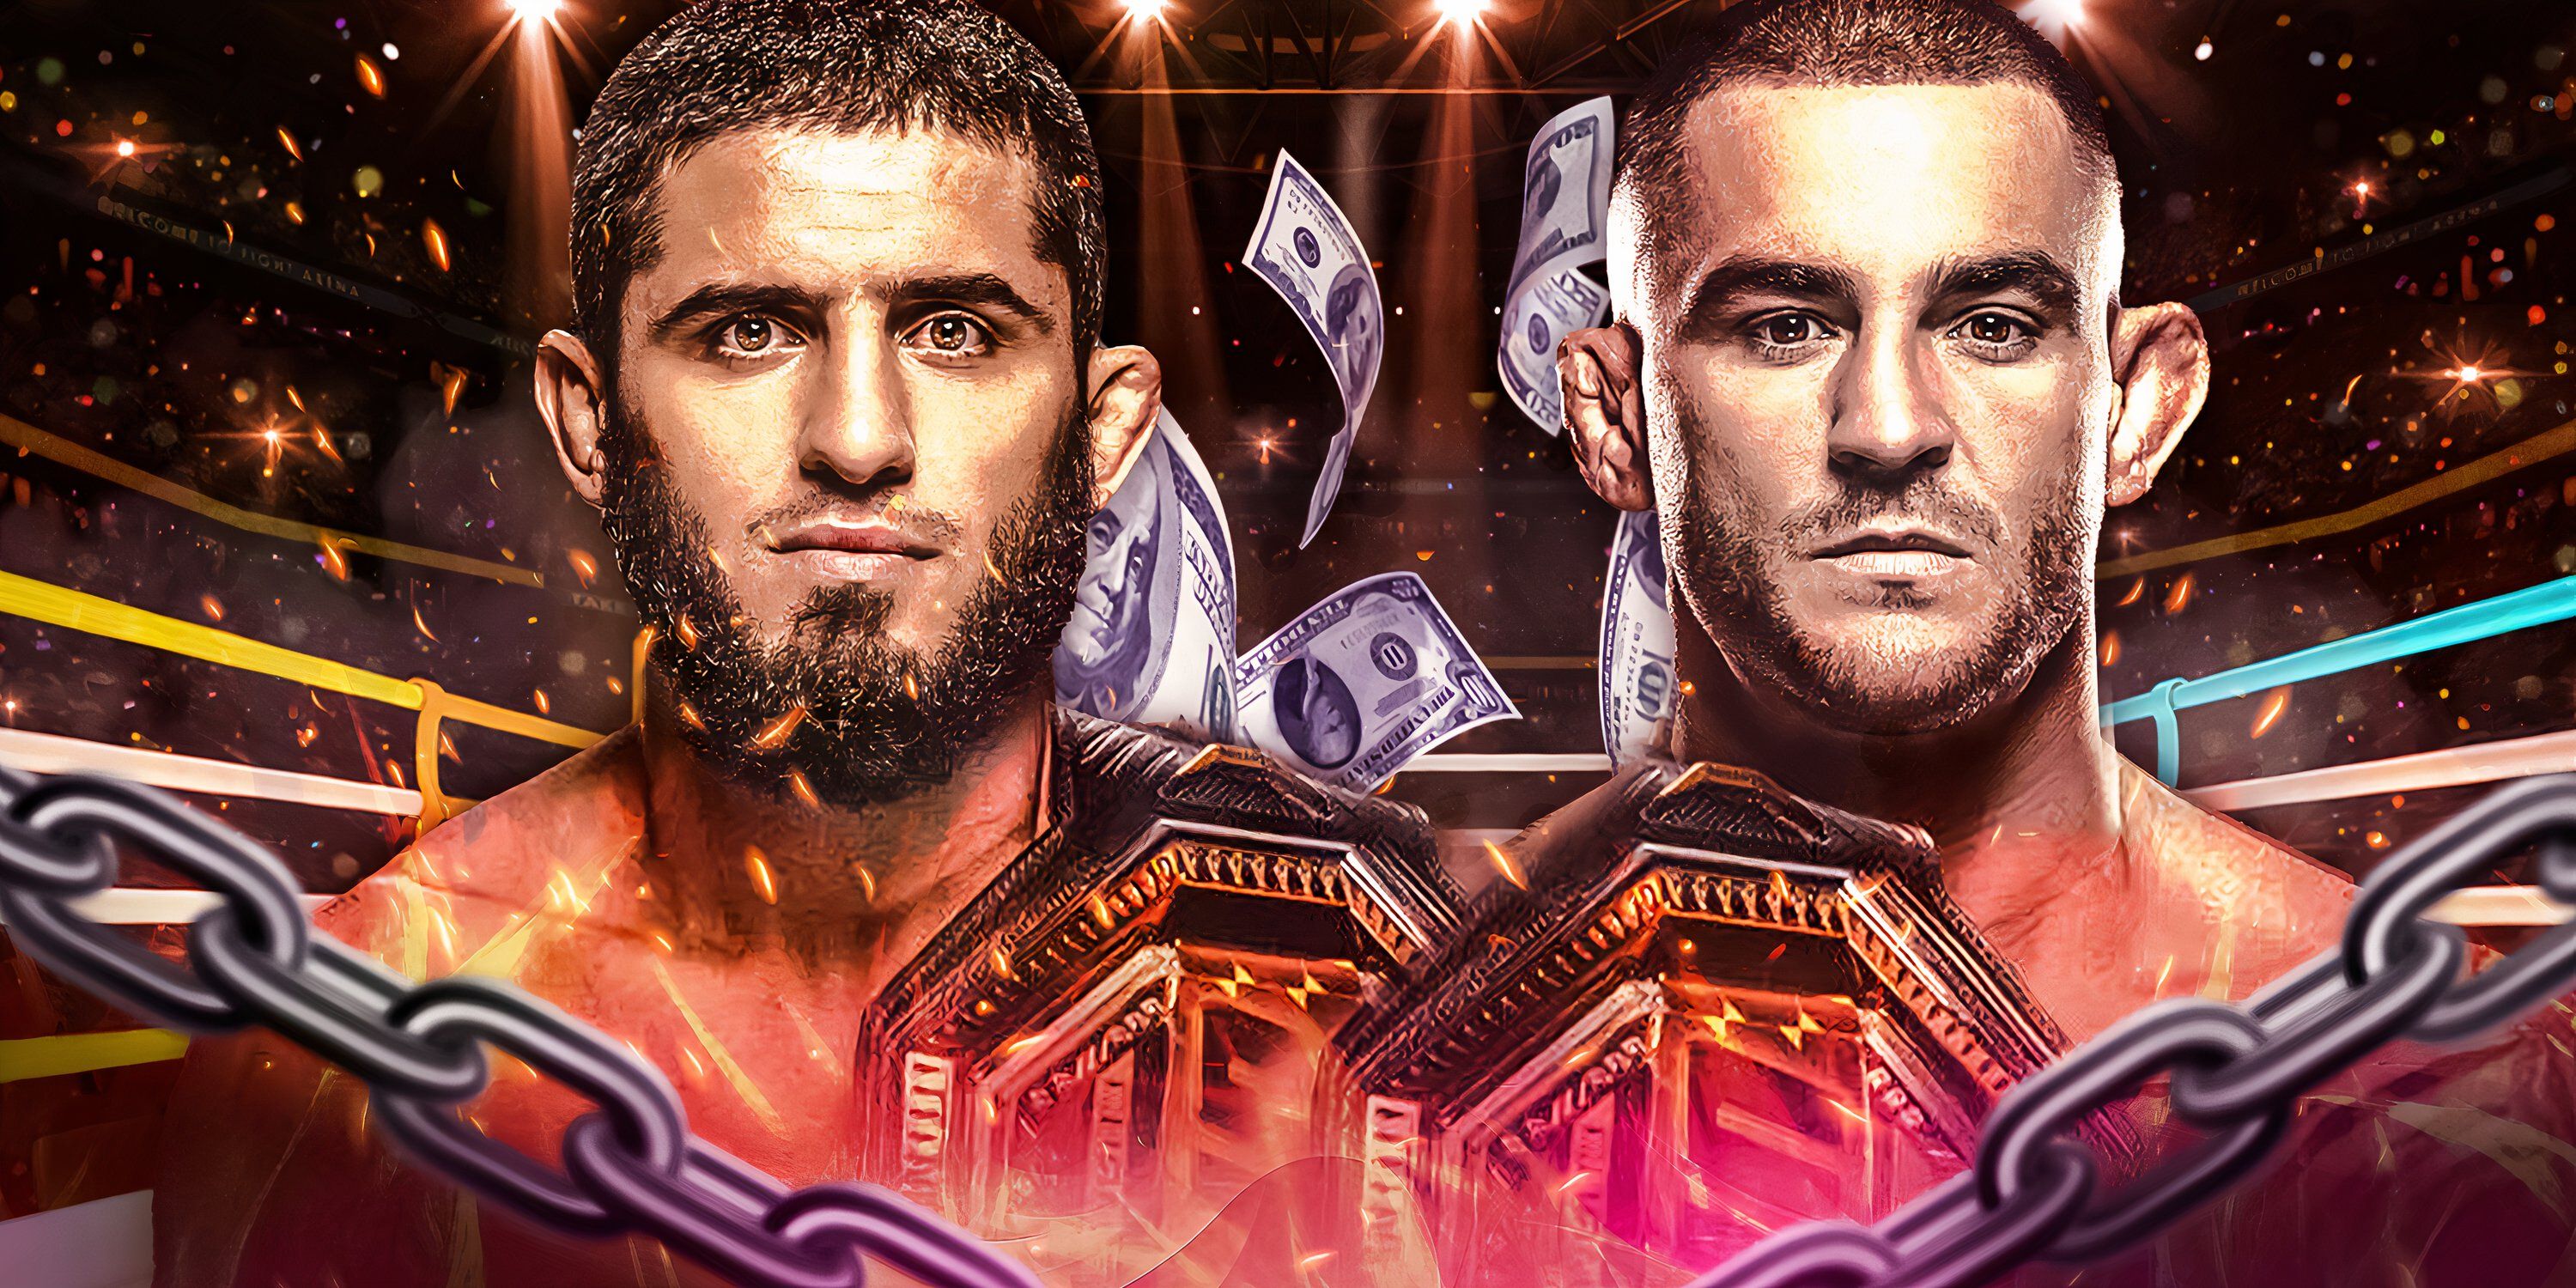 Islam-Makhachev-and-Dustin-Poirier-set-to-cash-in-as-expected-UFC-302-salaries-revealed (1)